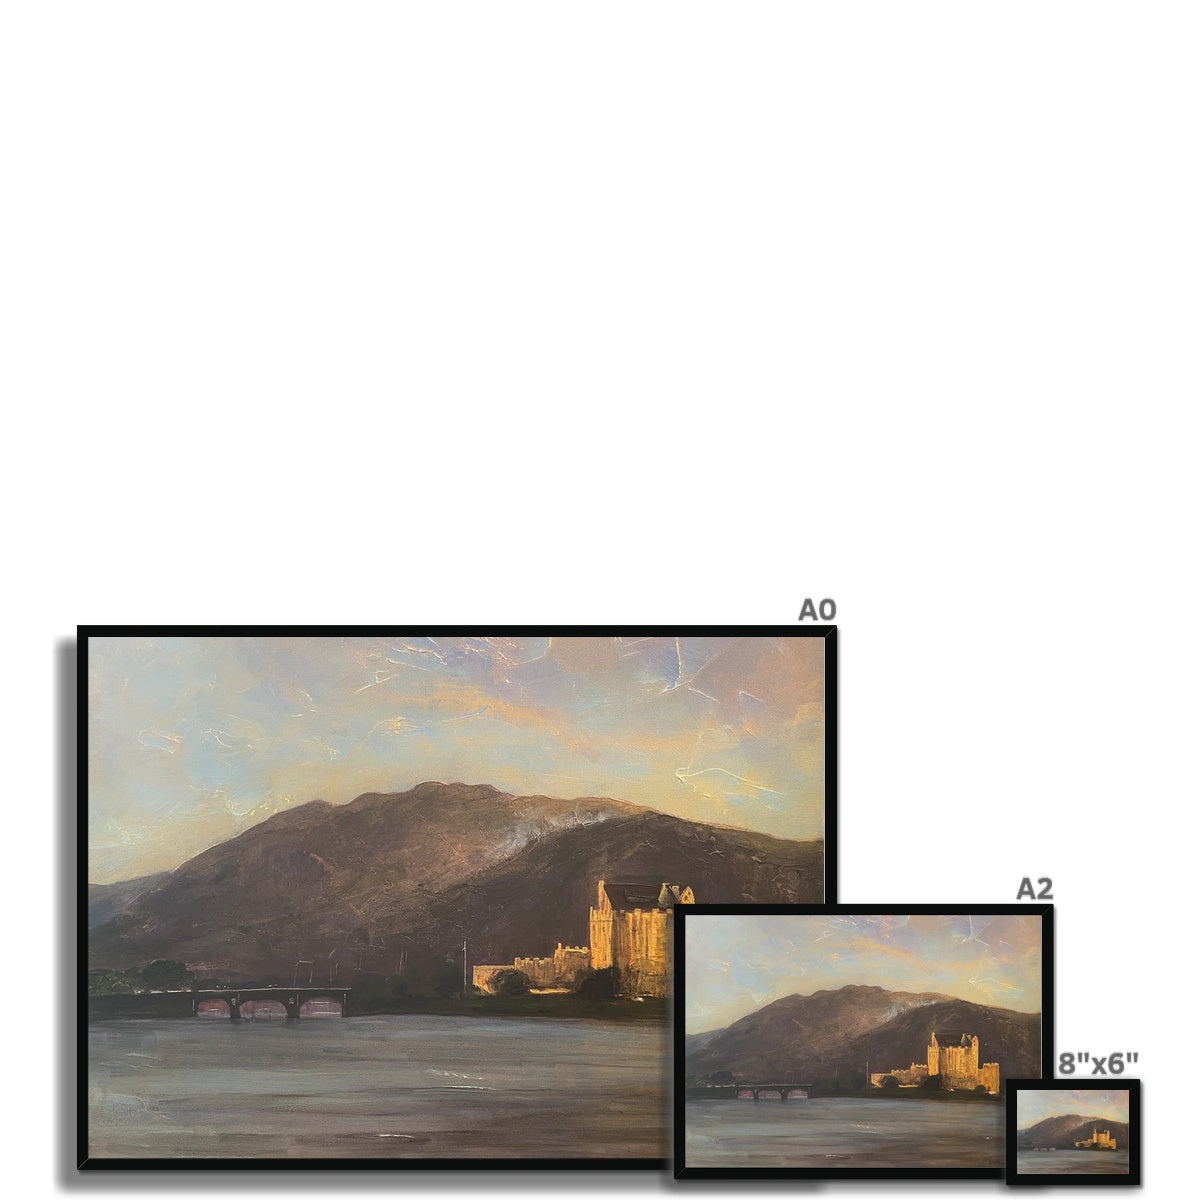 Eilean Donan Castle Painting | Framed Prints From Scotland-Framed Prints-Historic & Iconic Scotland Art Gallery-Paintings, Prints, Homeware, Art Gifts From Scotland By Scottish Artist Kevin Hunter